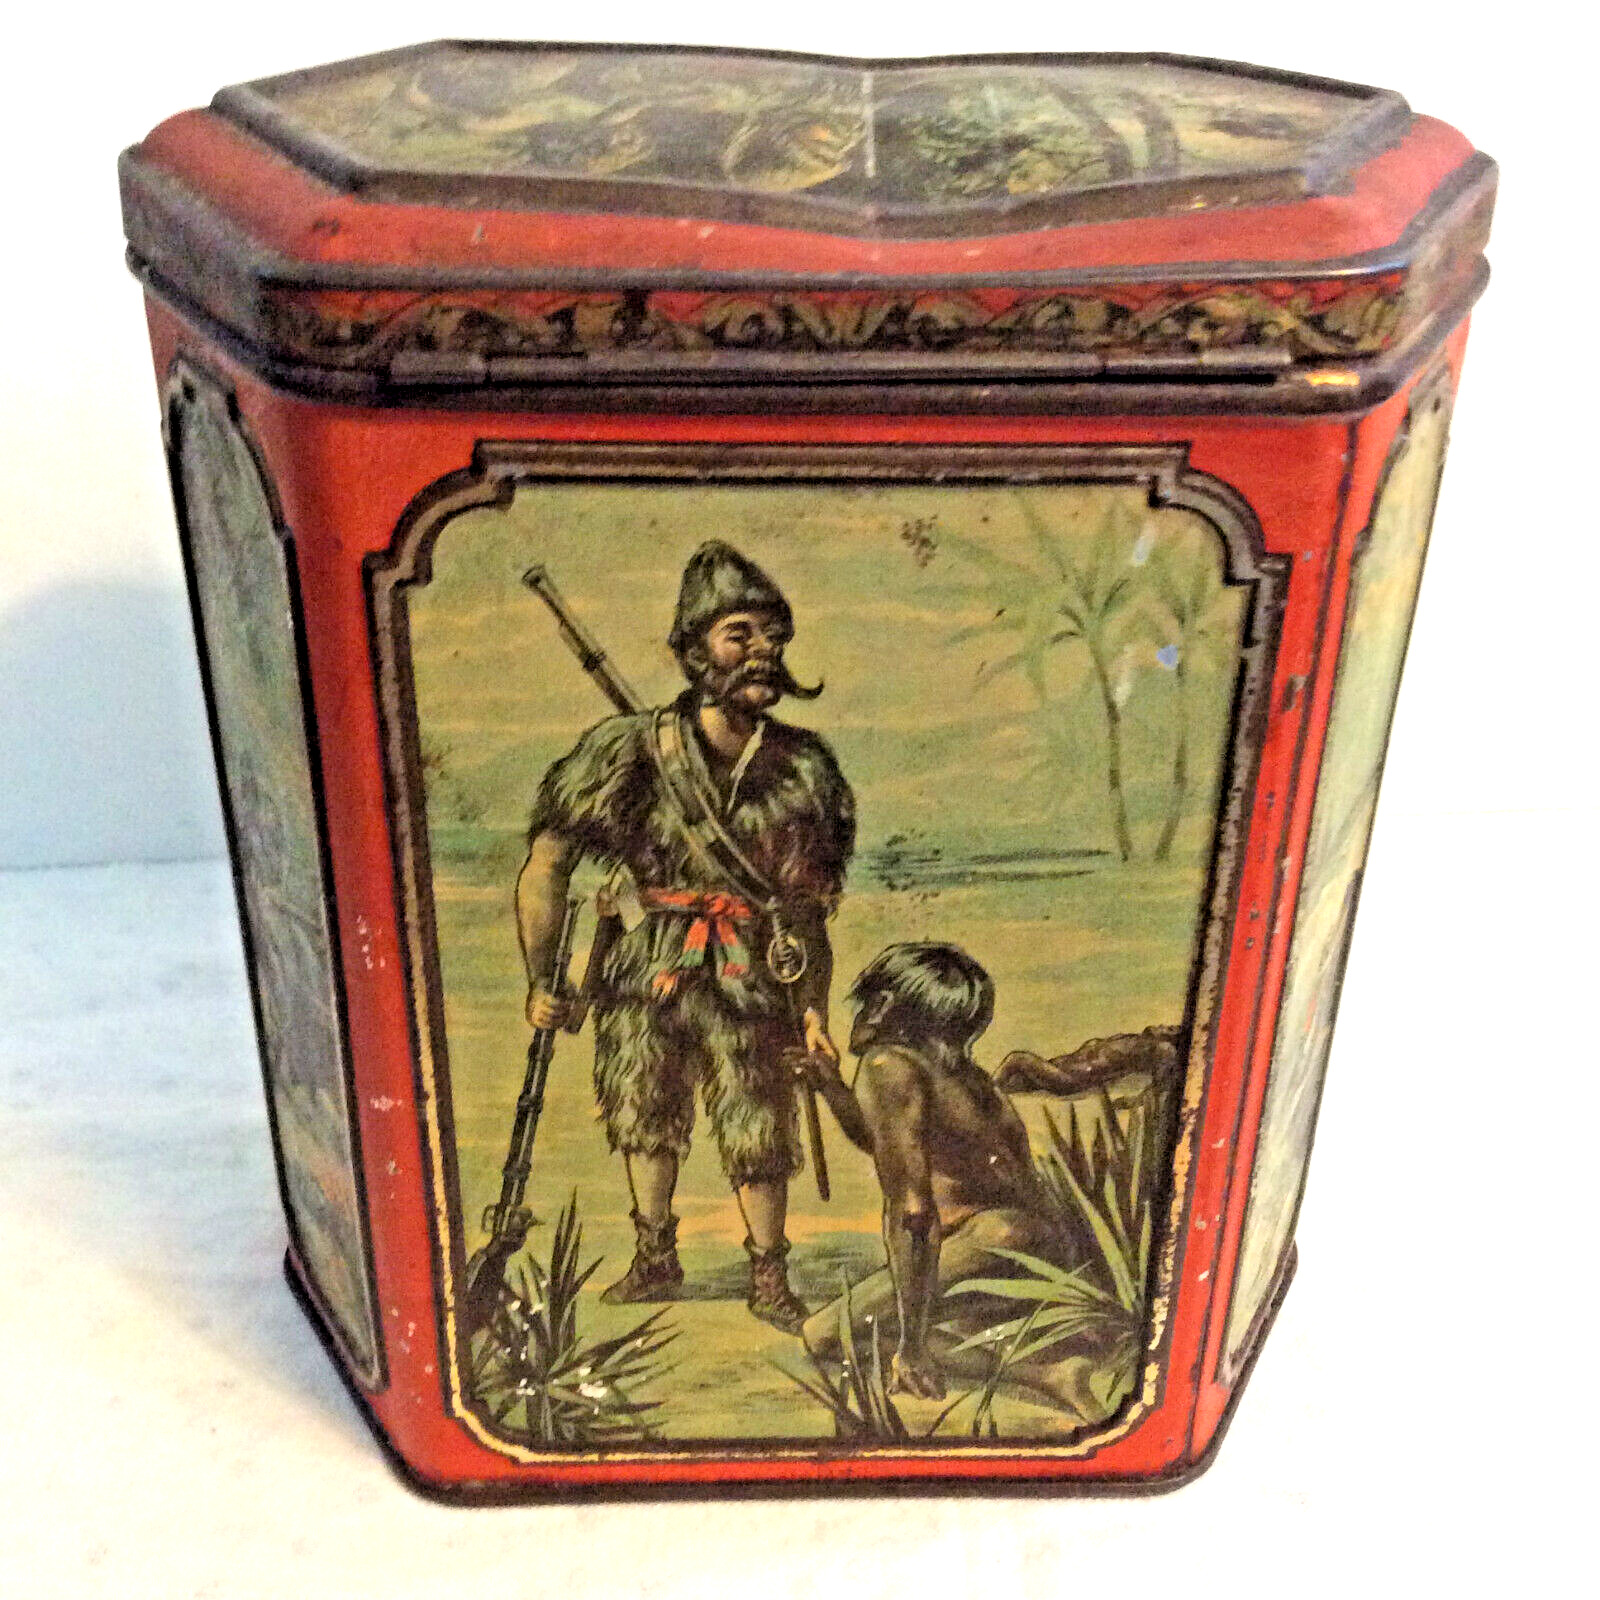 HUNTLEY & PALMERS Buscuit Tin ROBINSON CRUSOE 6 detailed picture Man Friday 1892